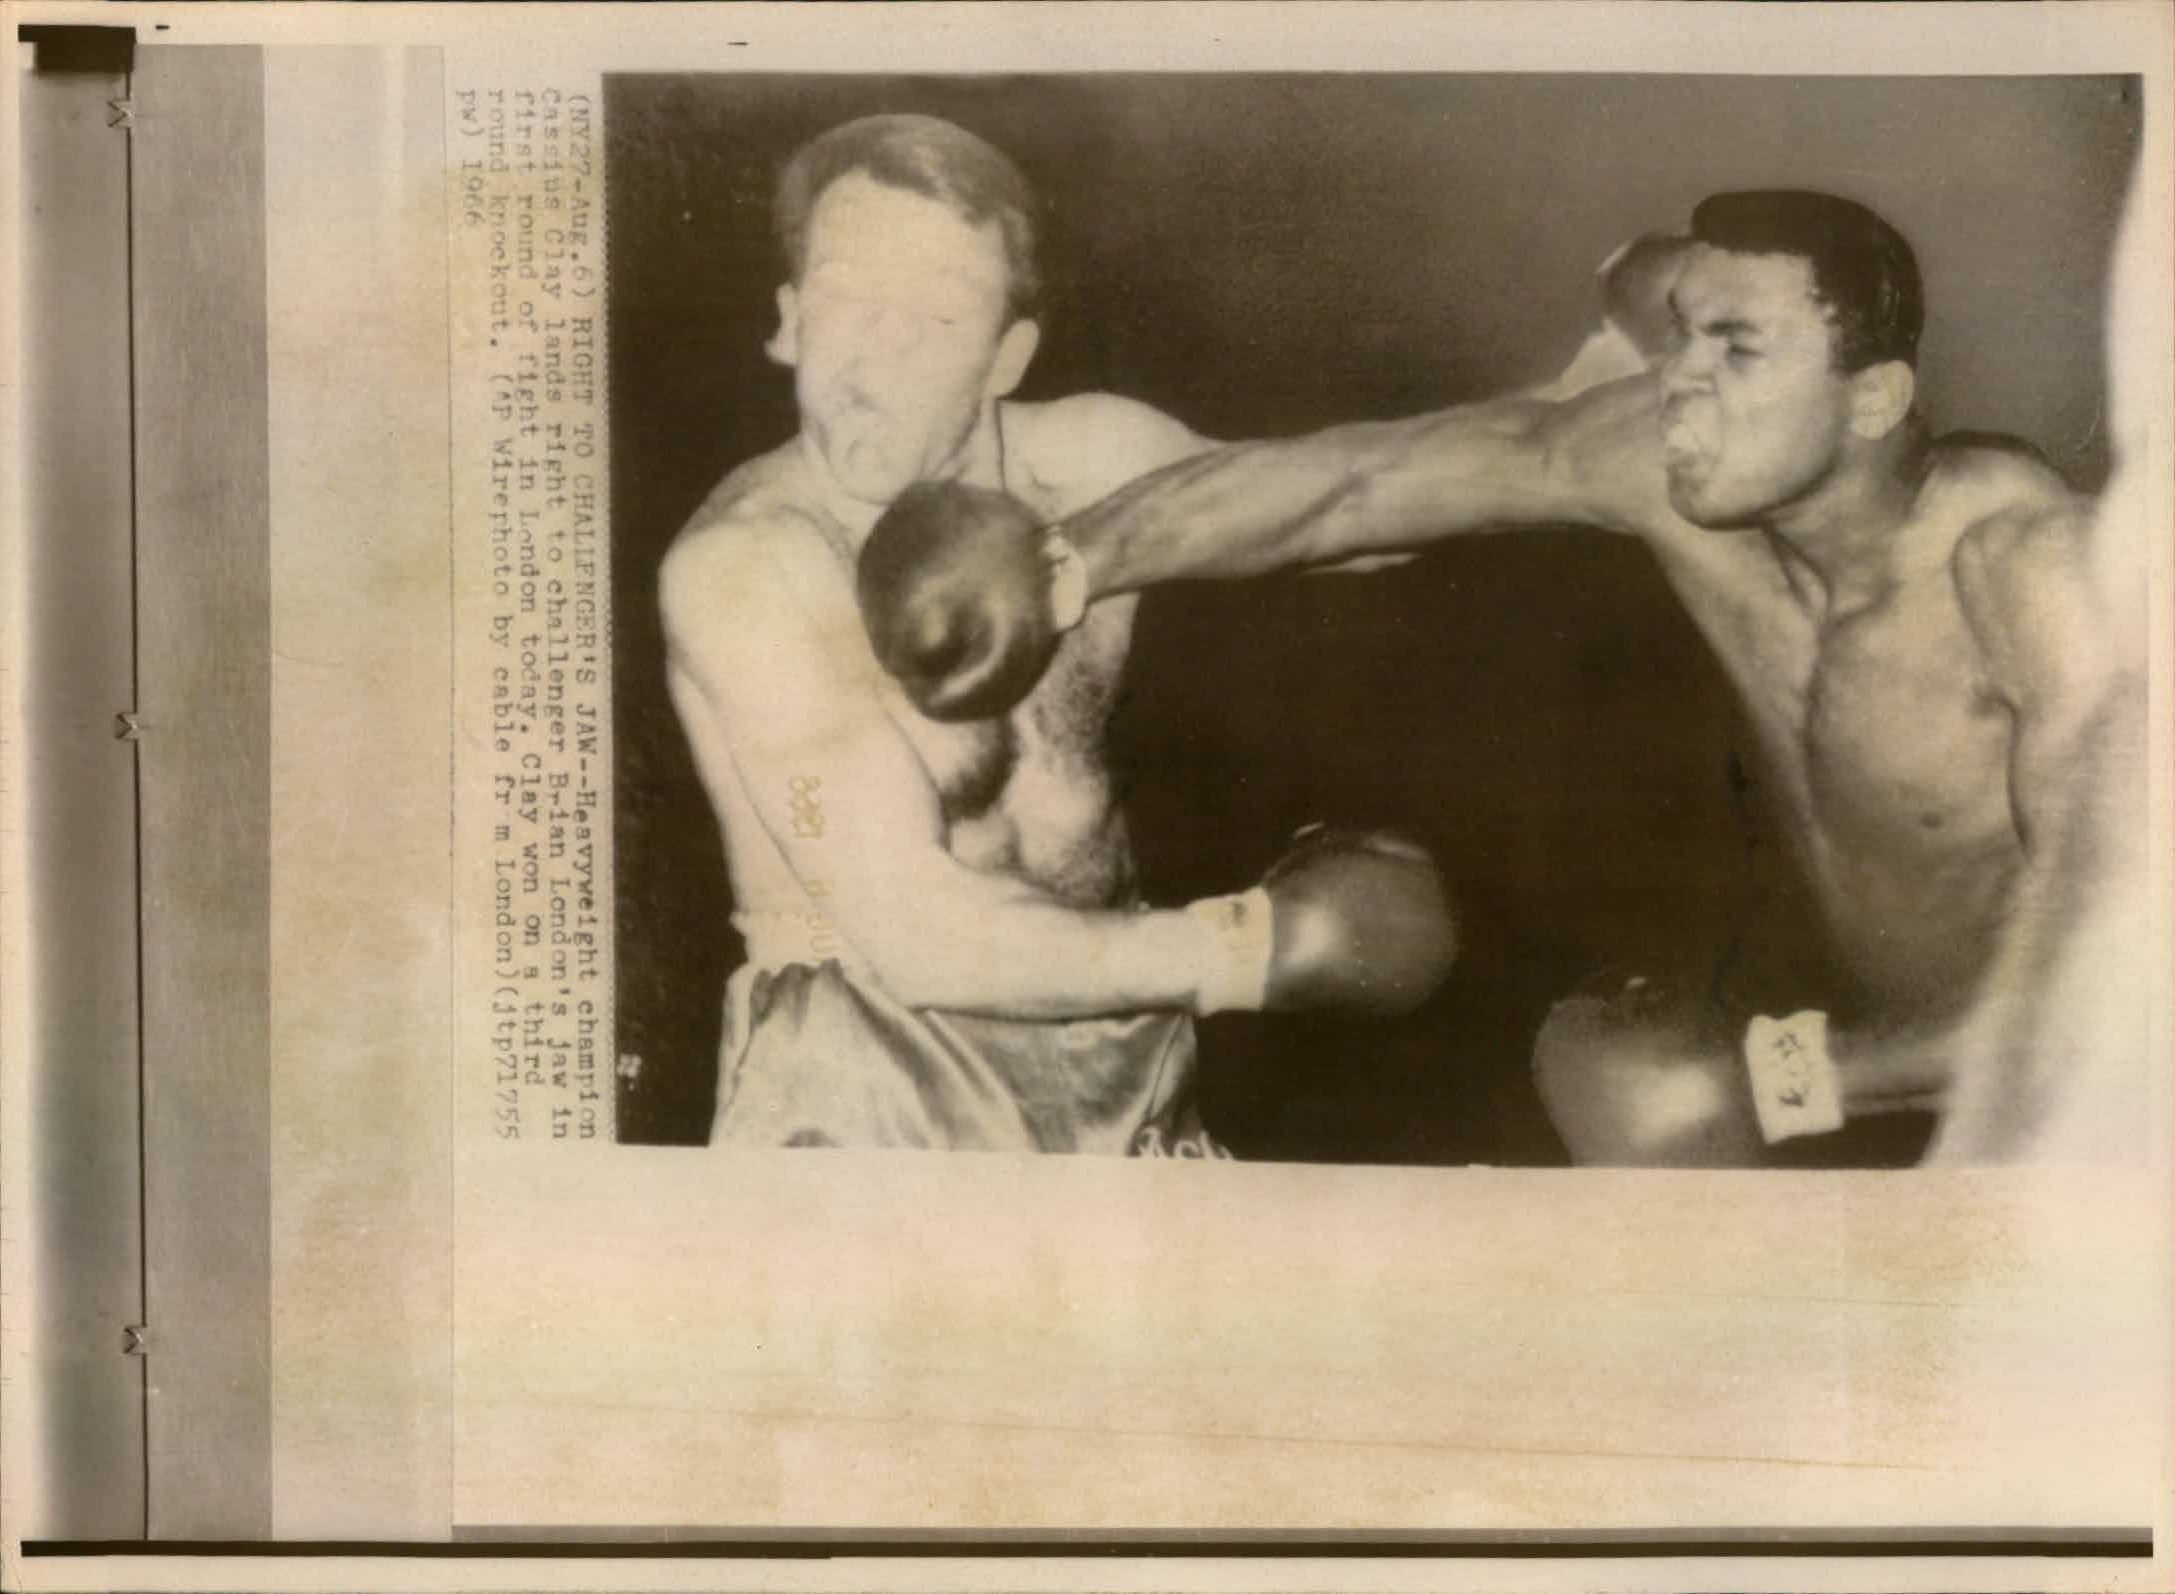 Tickets - Cassius Clay- Gold Medal Championship (1960): ragin14 Set Image  Gallery